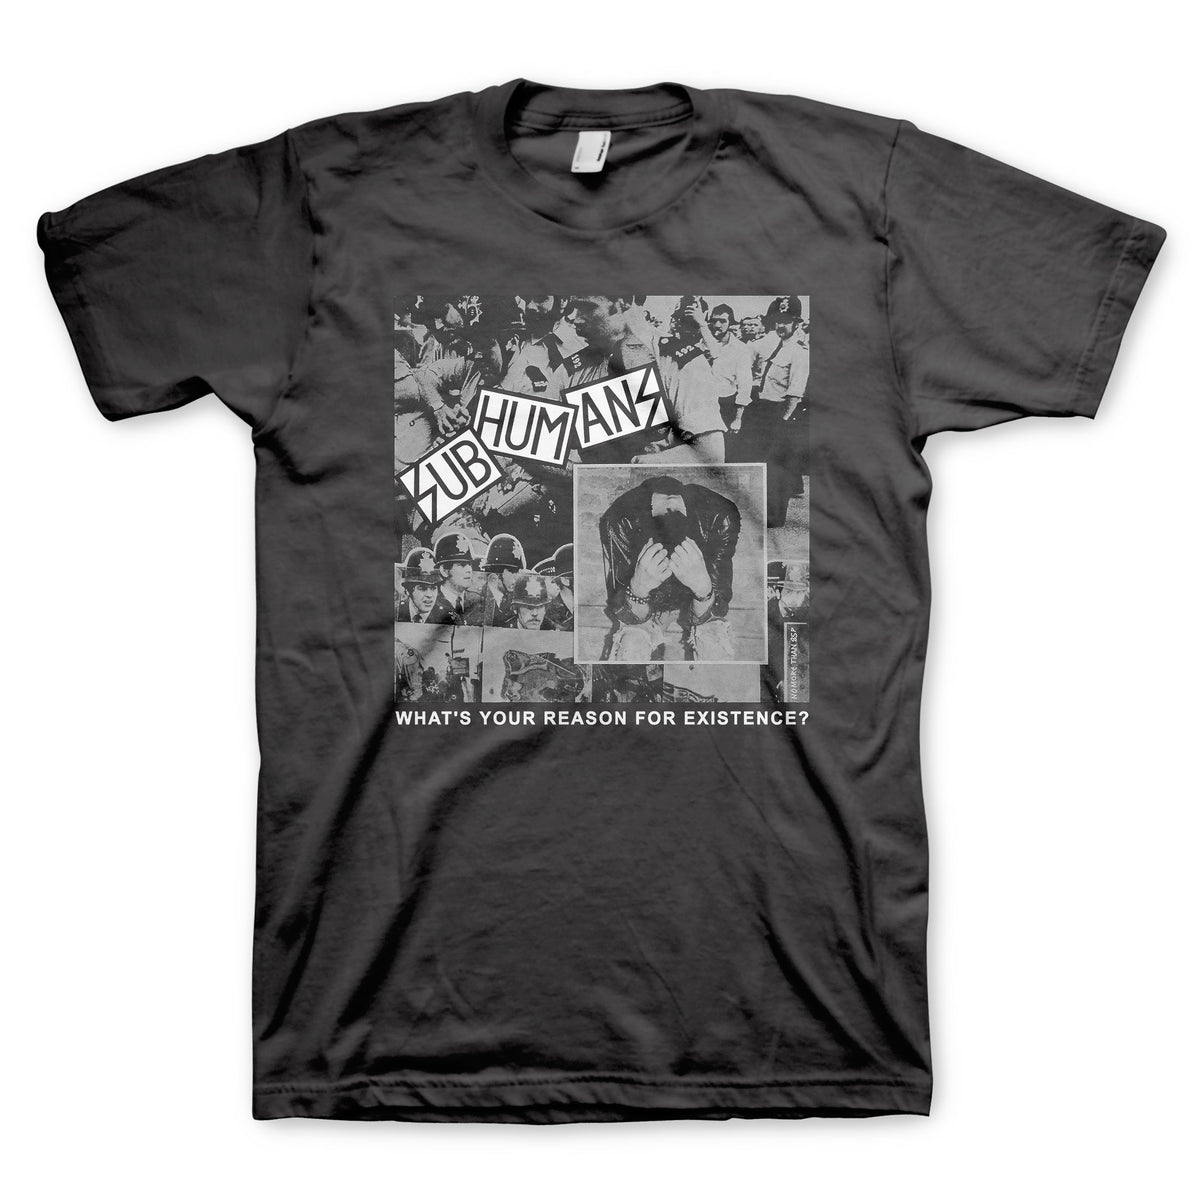 Subhumans Reason for Existance T-Shirt - Flyclothing LLC